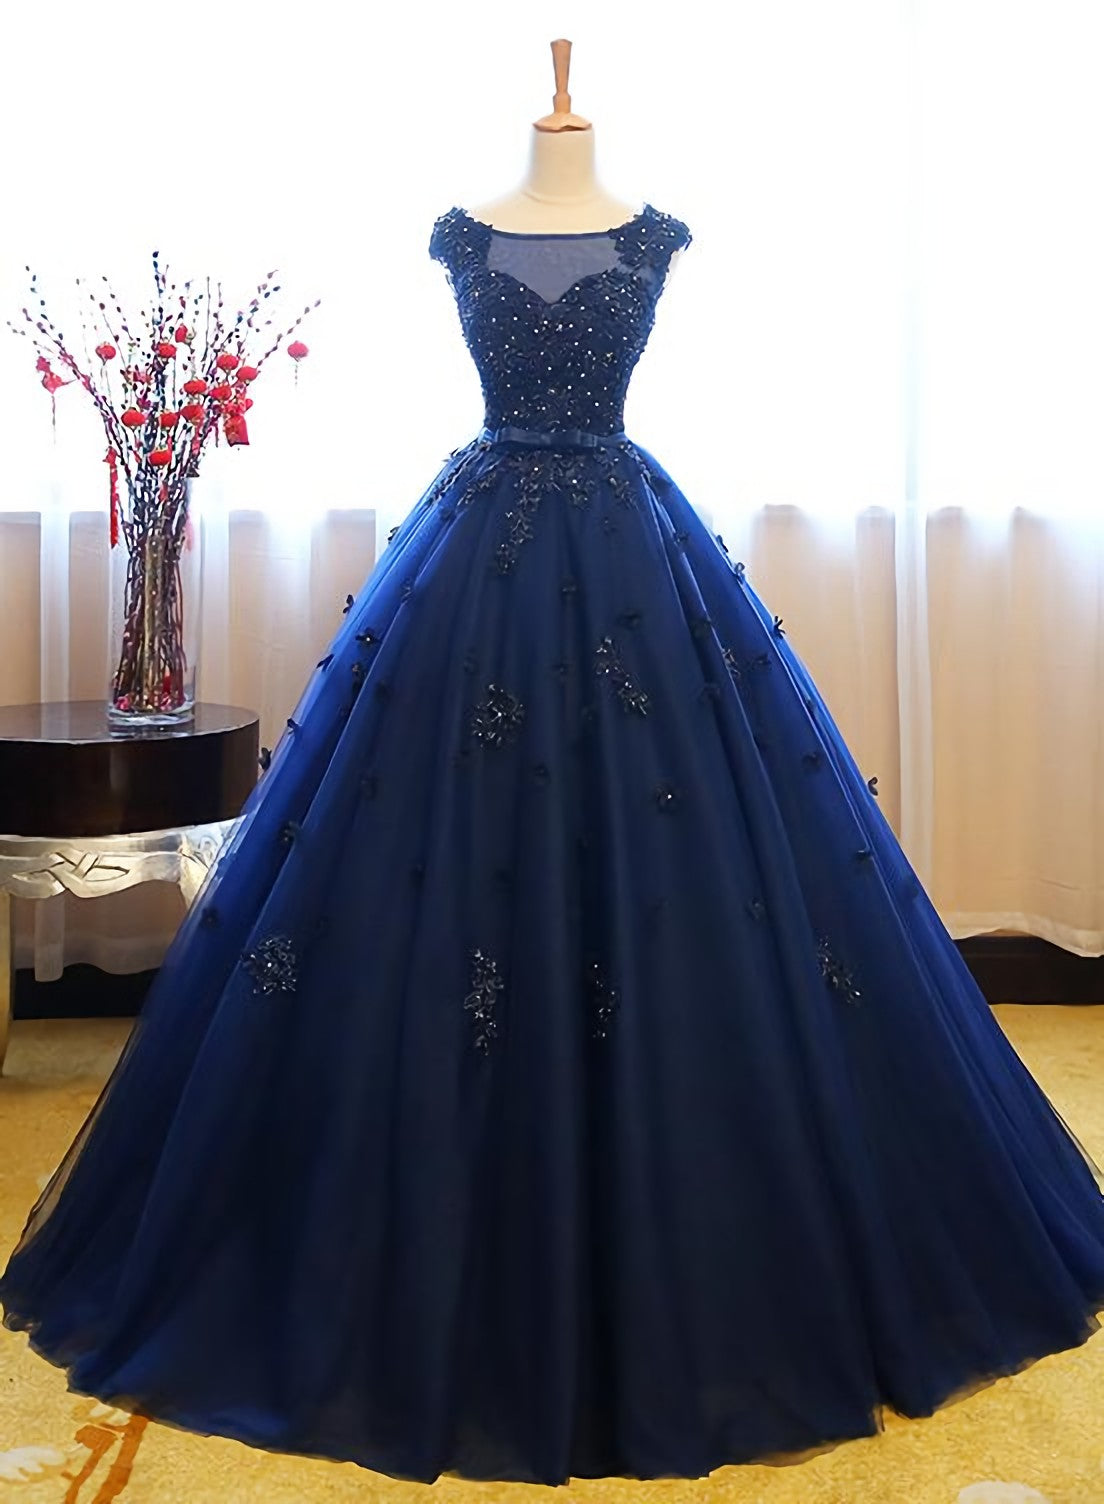 Navy Blue Tulle Cap Sleeves Quinceanera Dresses, Blue Beaded Corset Ball Gown Party Dress Outfits, Homecoming